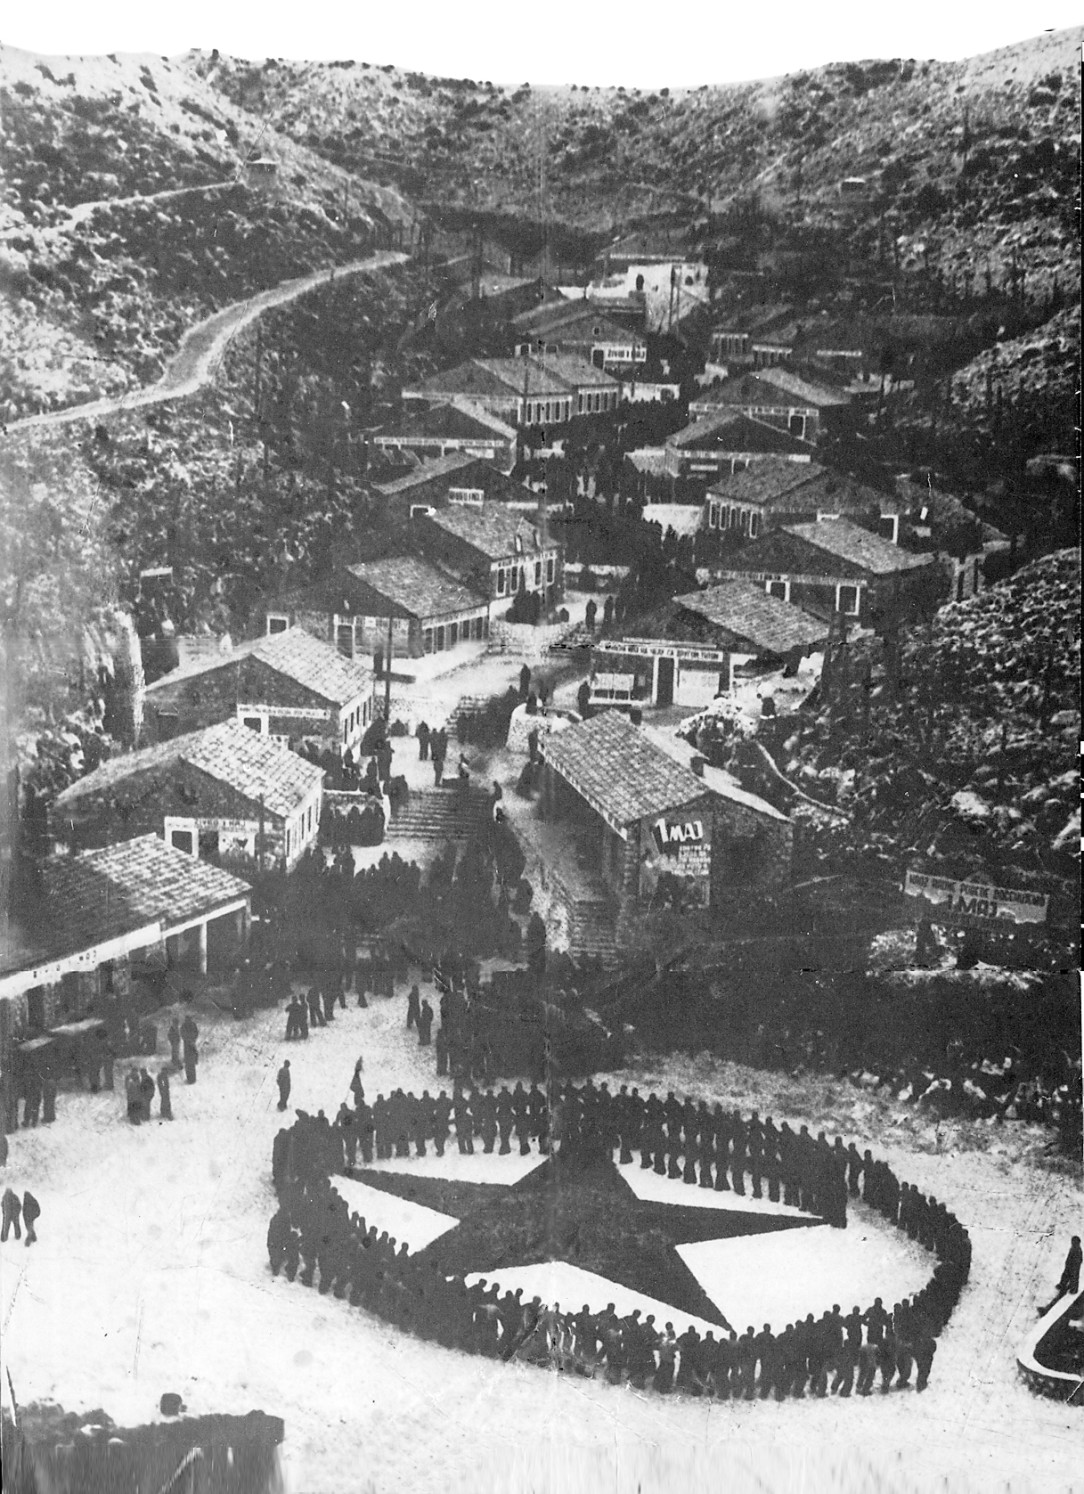 Inmates form a circle around a red star. Goli otok labor camp and prison for political dissidents, Yugoslavia, ca 1950